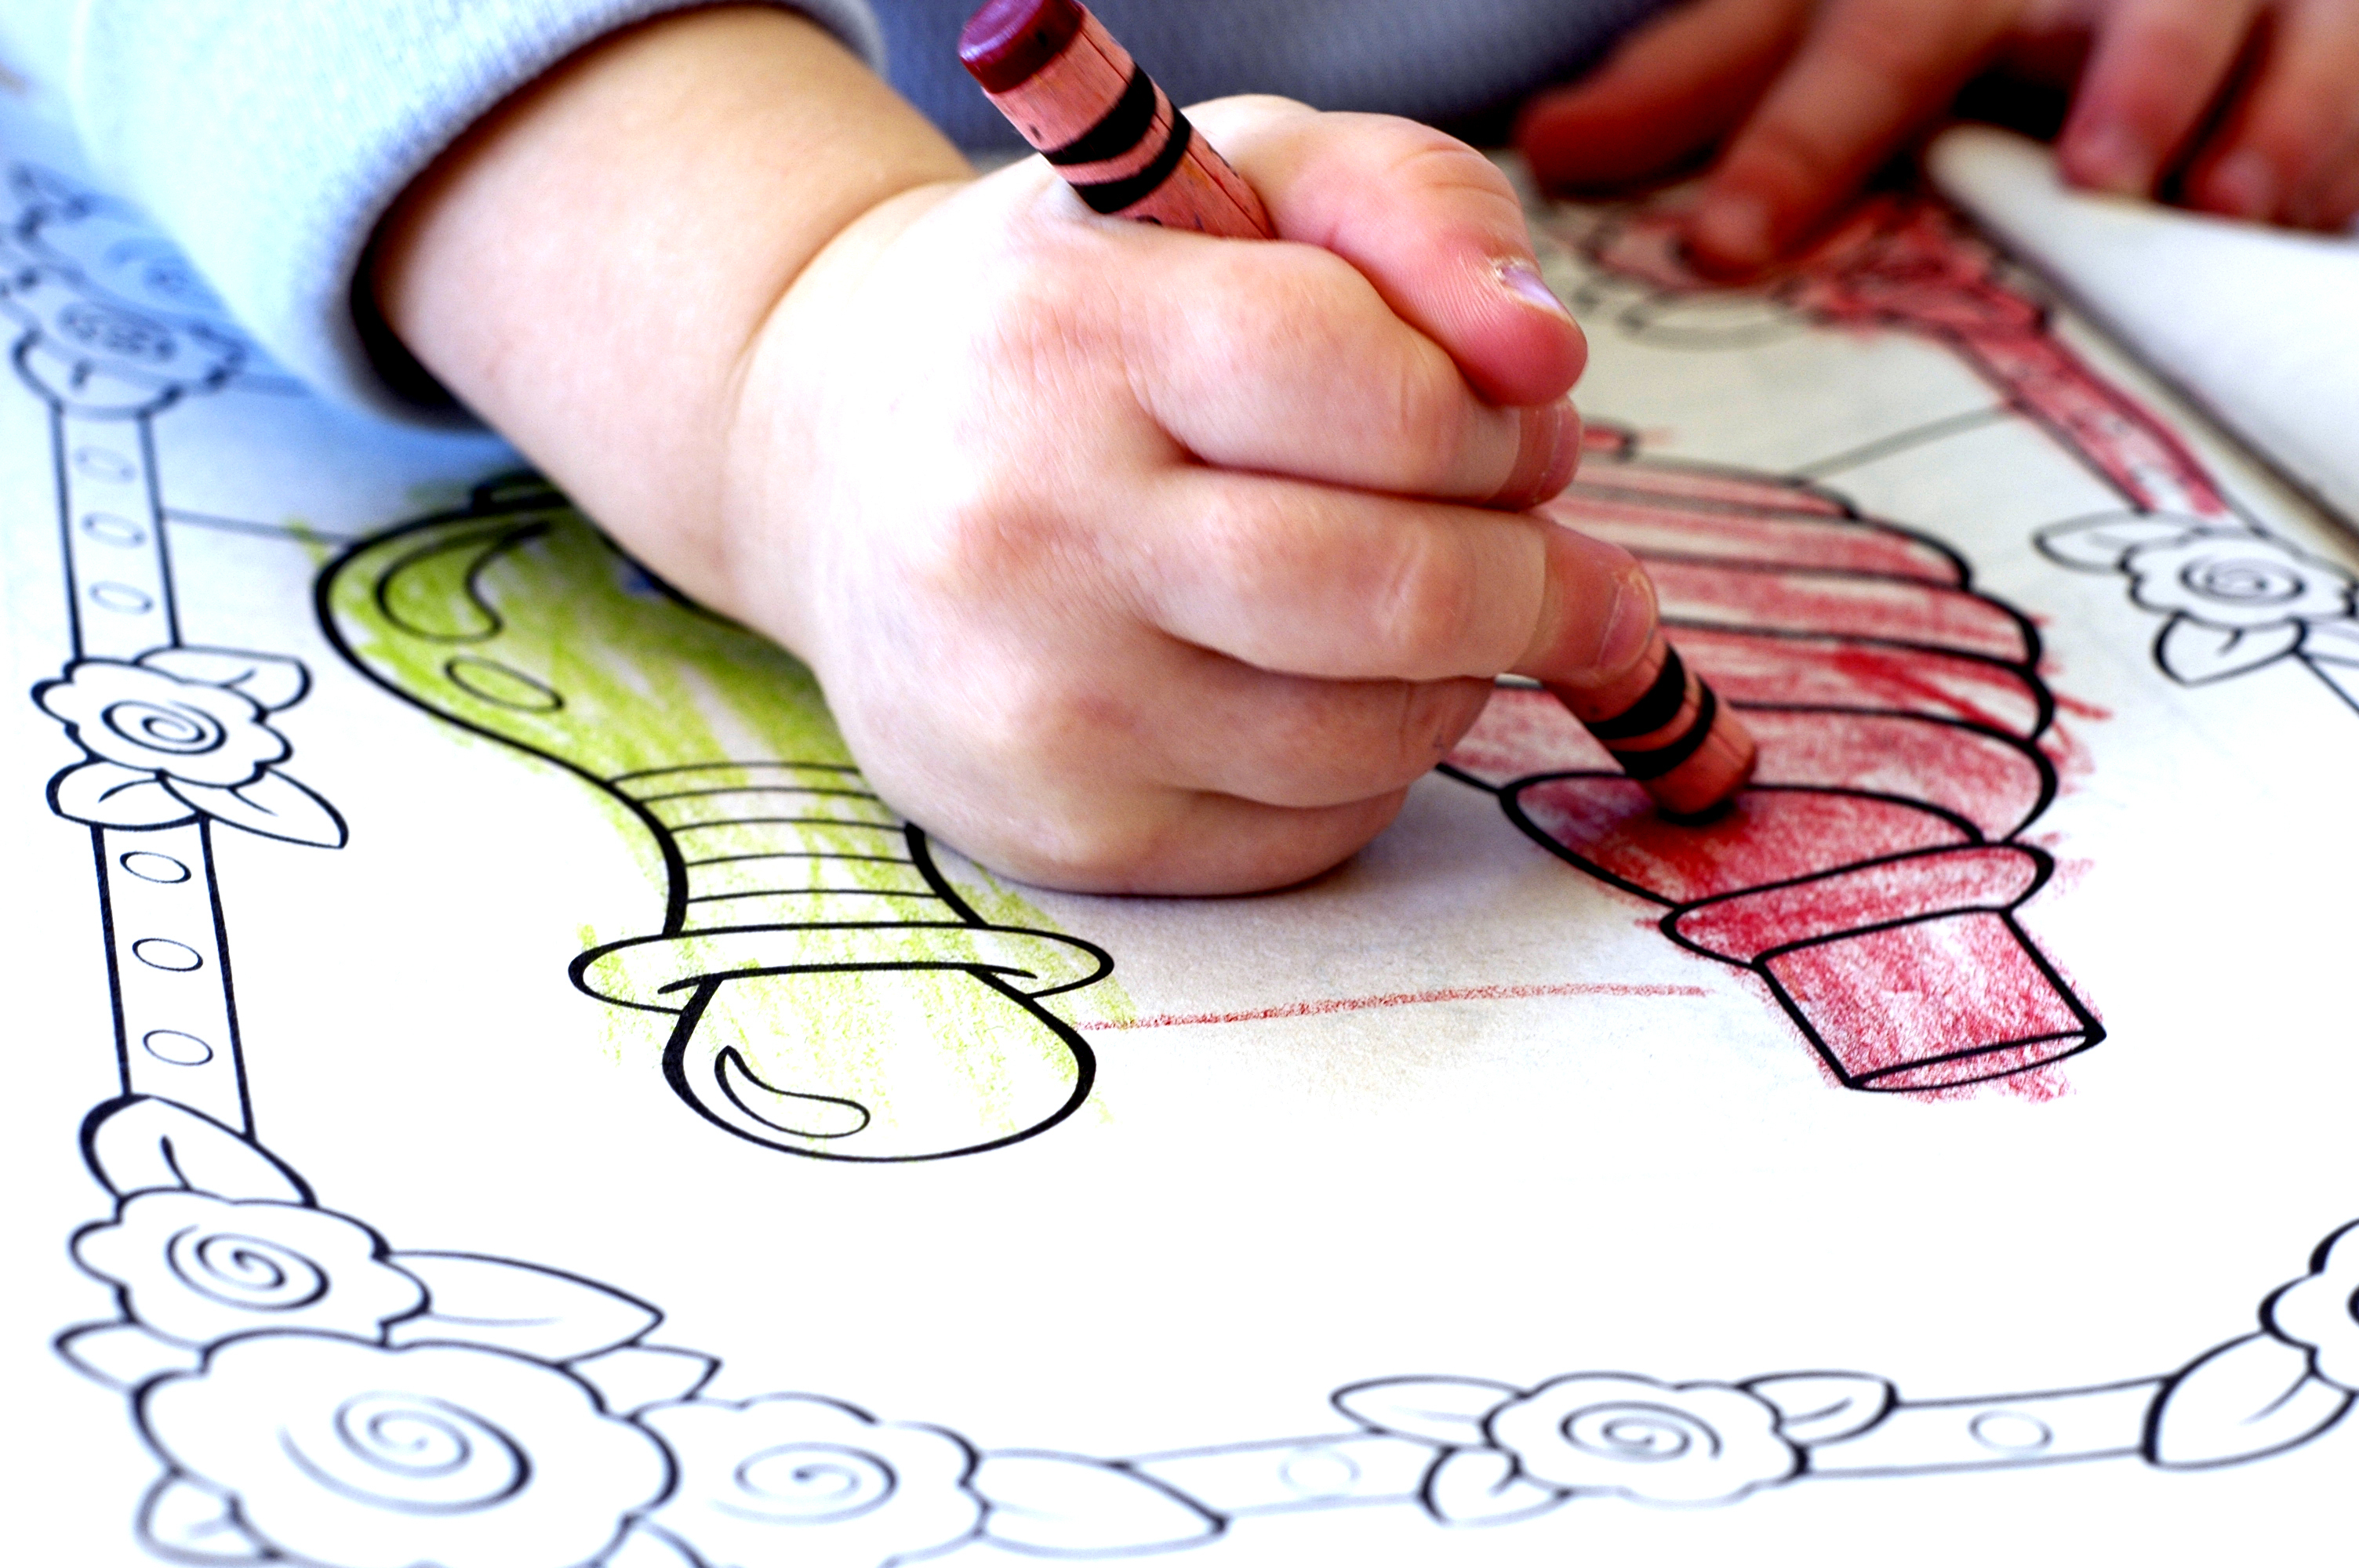 A child coloring.